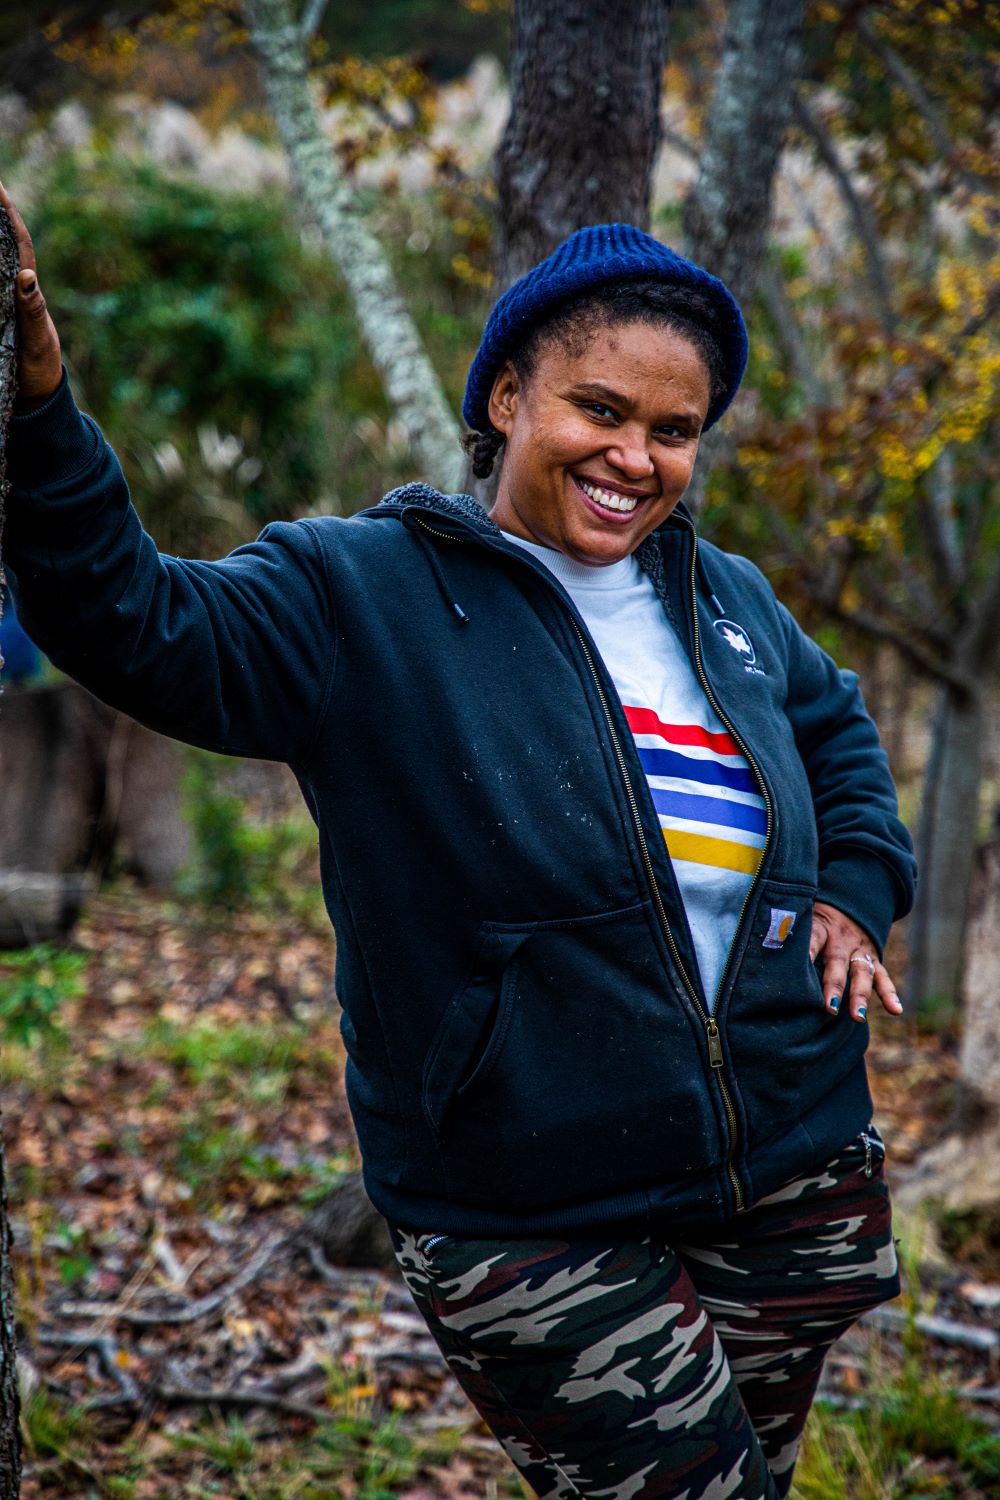 Myisha Humphrey, supervisor of operations at Greenbelt Native Plant Center, started with NYC Parks as a maintenance worker and participated in professional development and training to rise through the ranks to her current position. Aleksandr Watson / American Forests